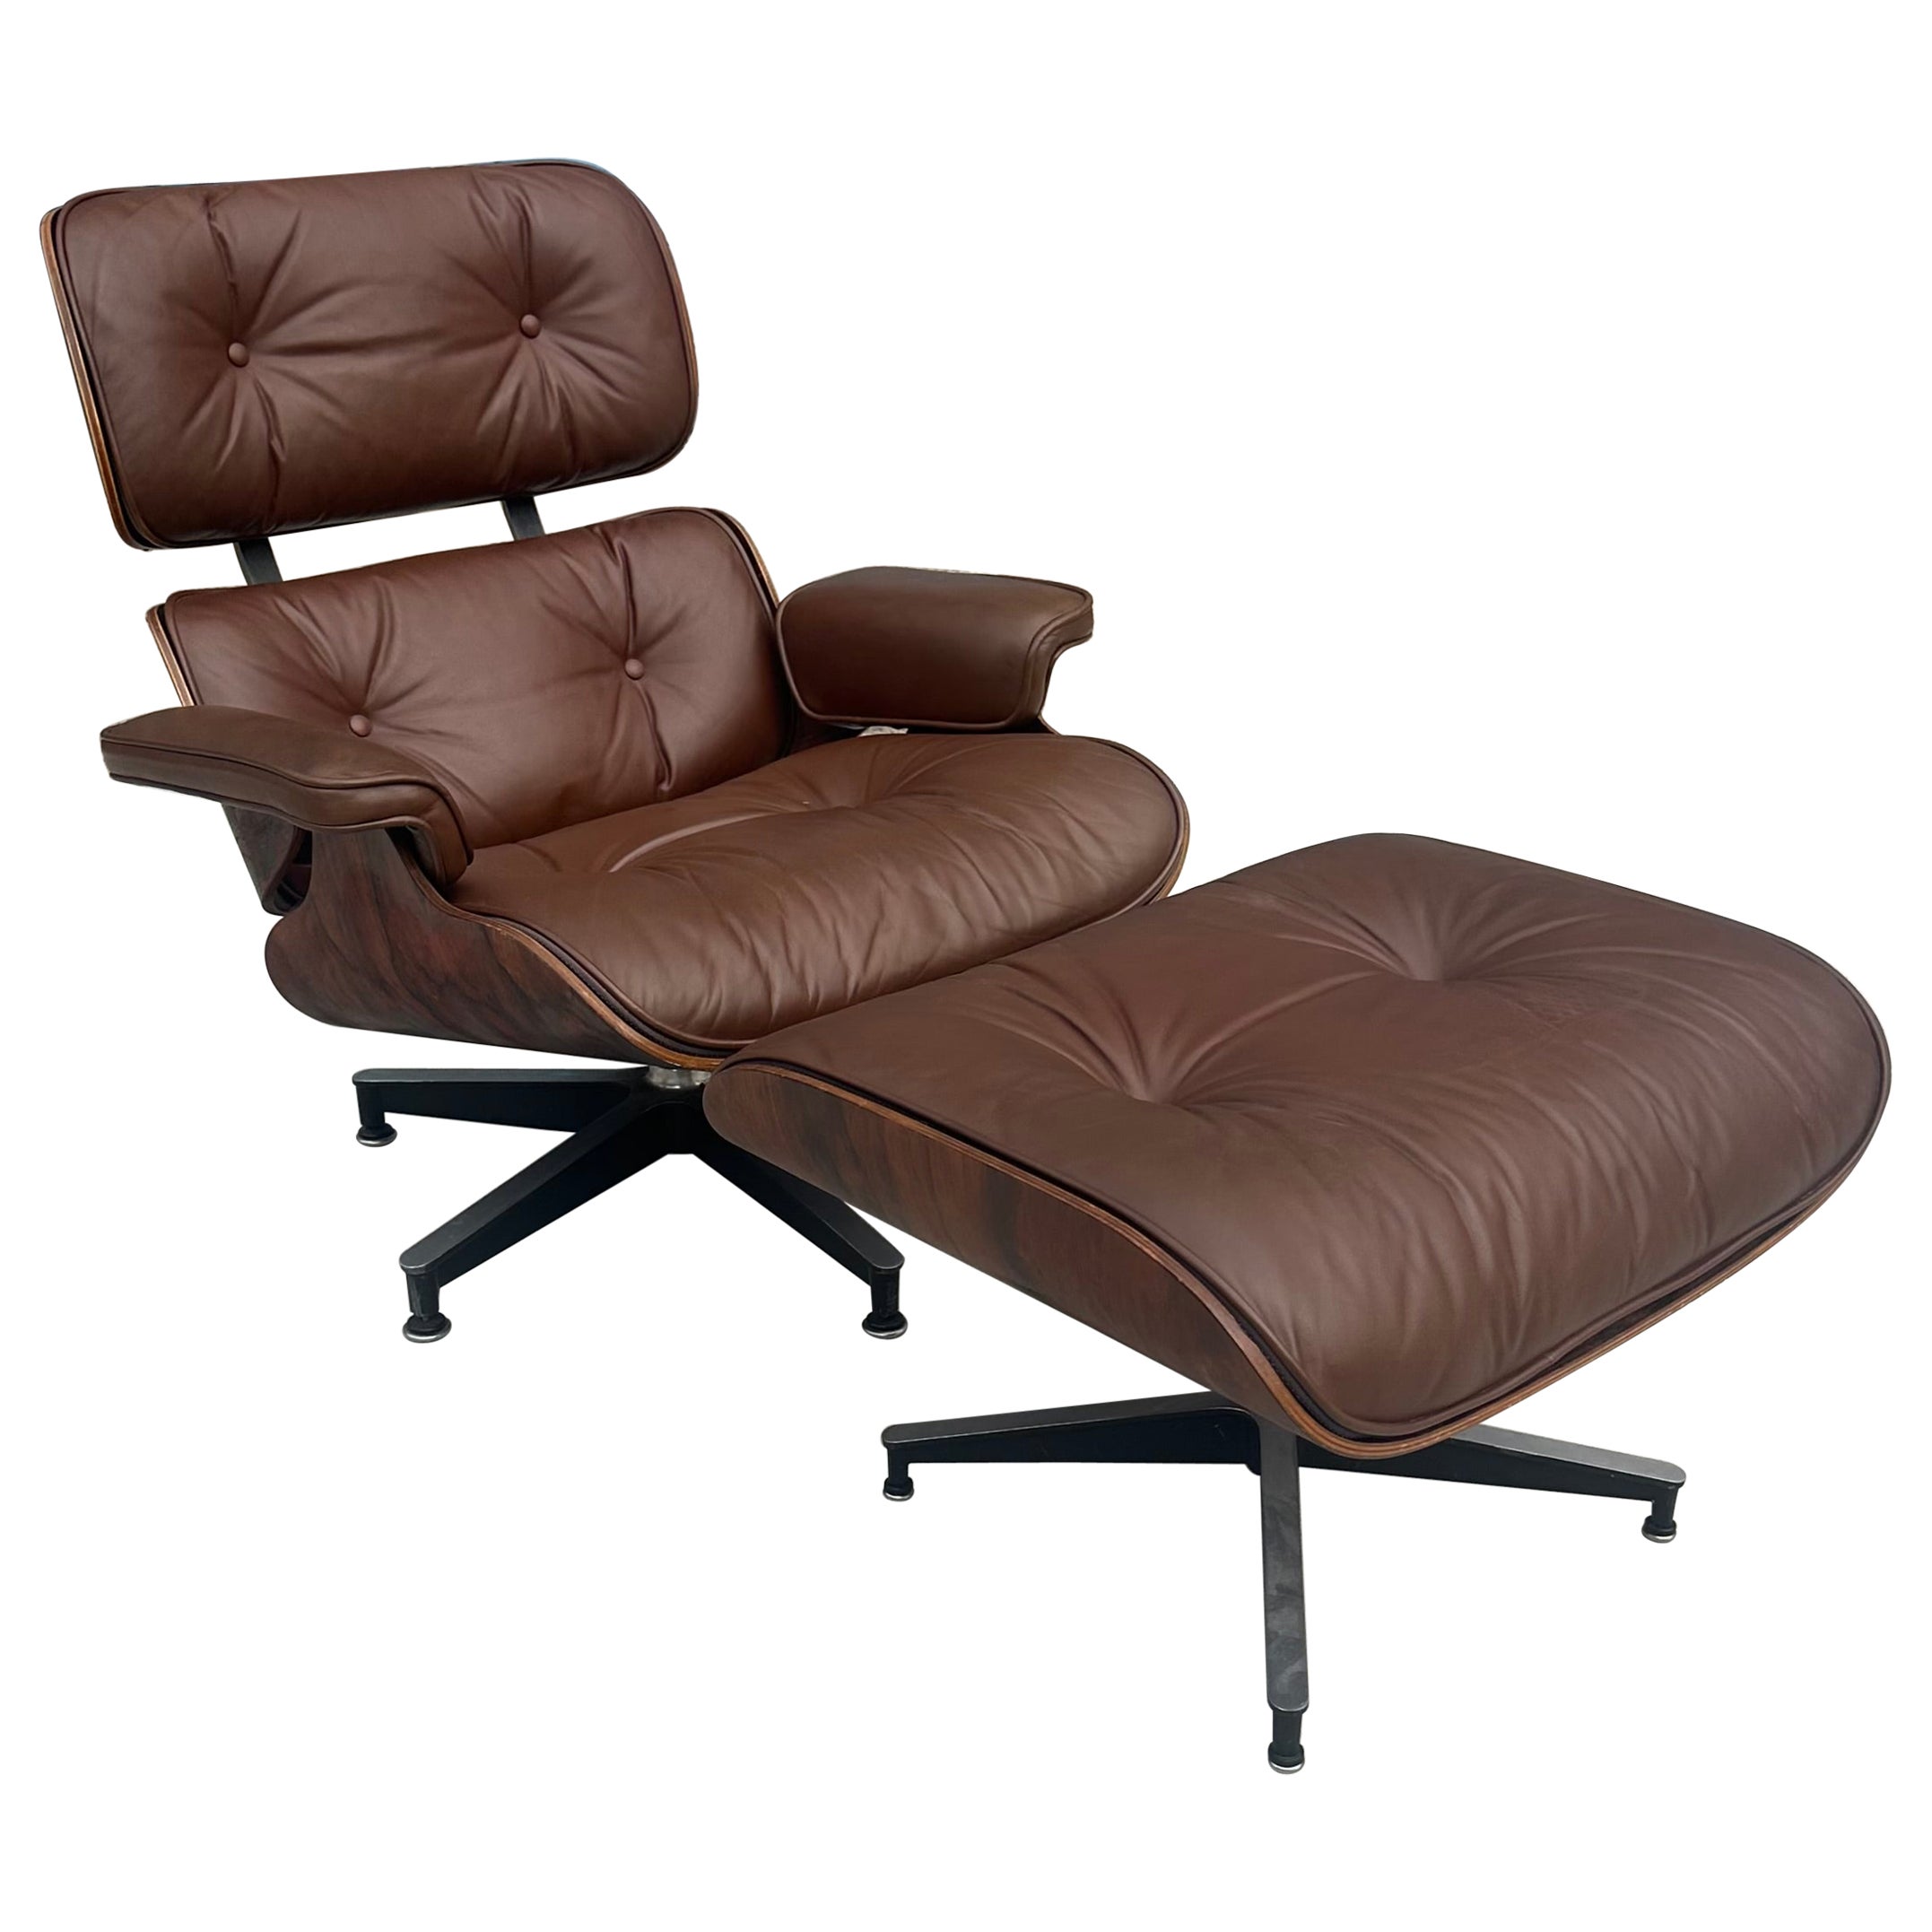 Restored Eames Herman Miller Lounge Chair and Ottoman For Sale